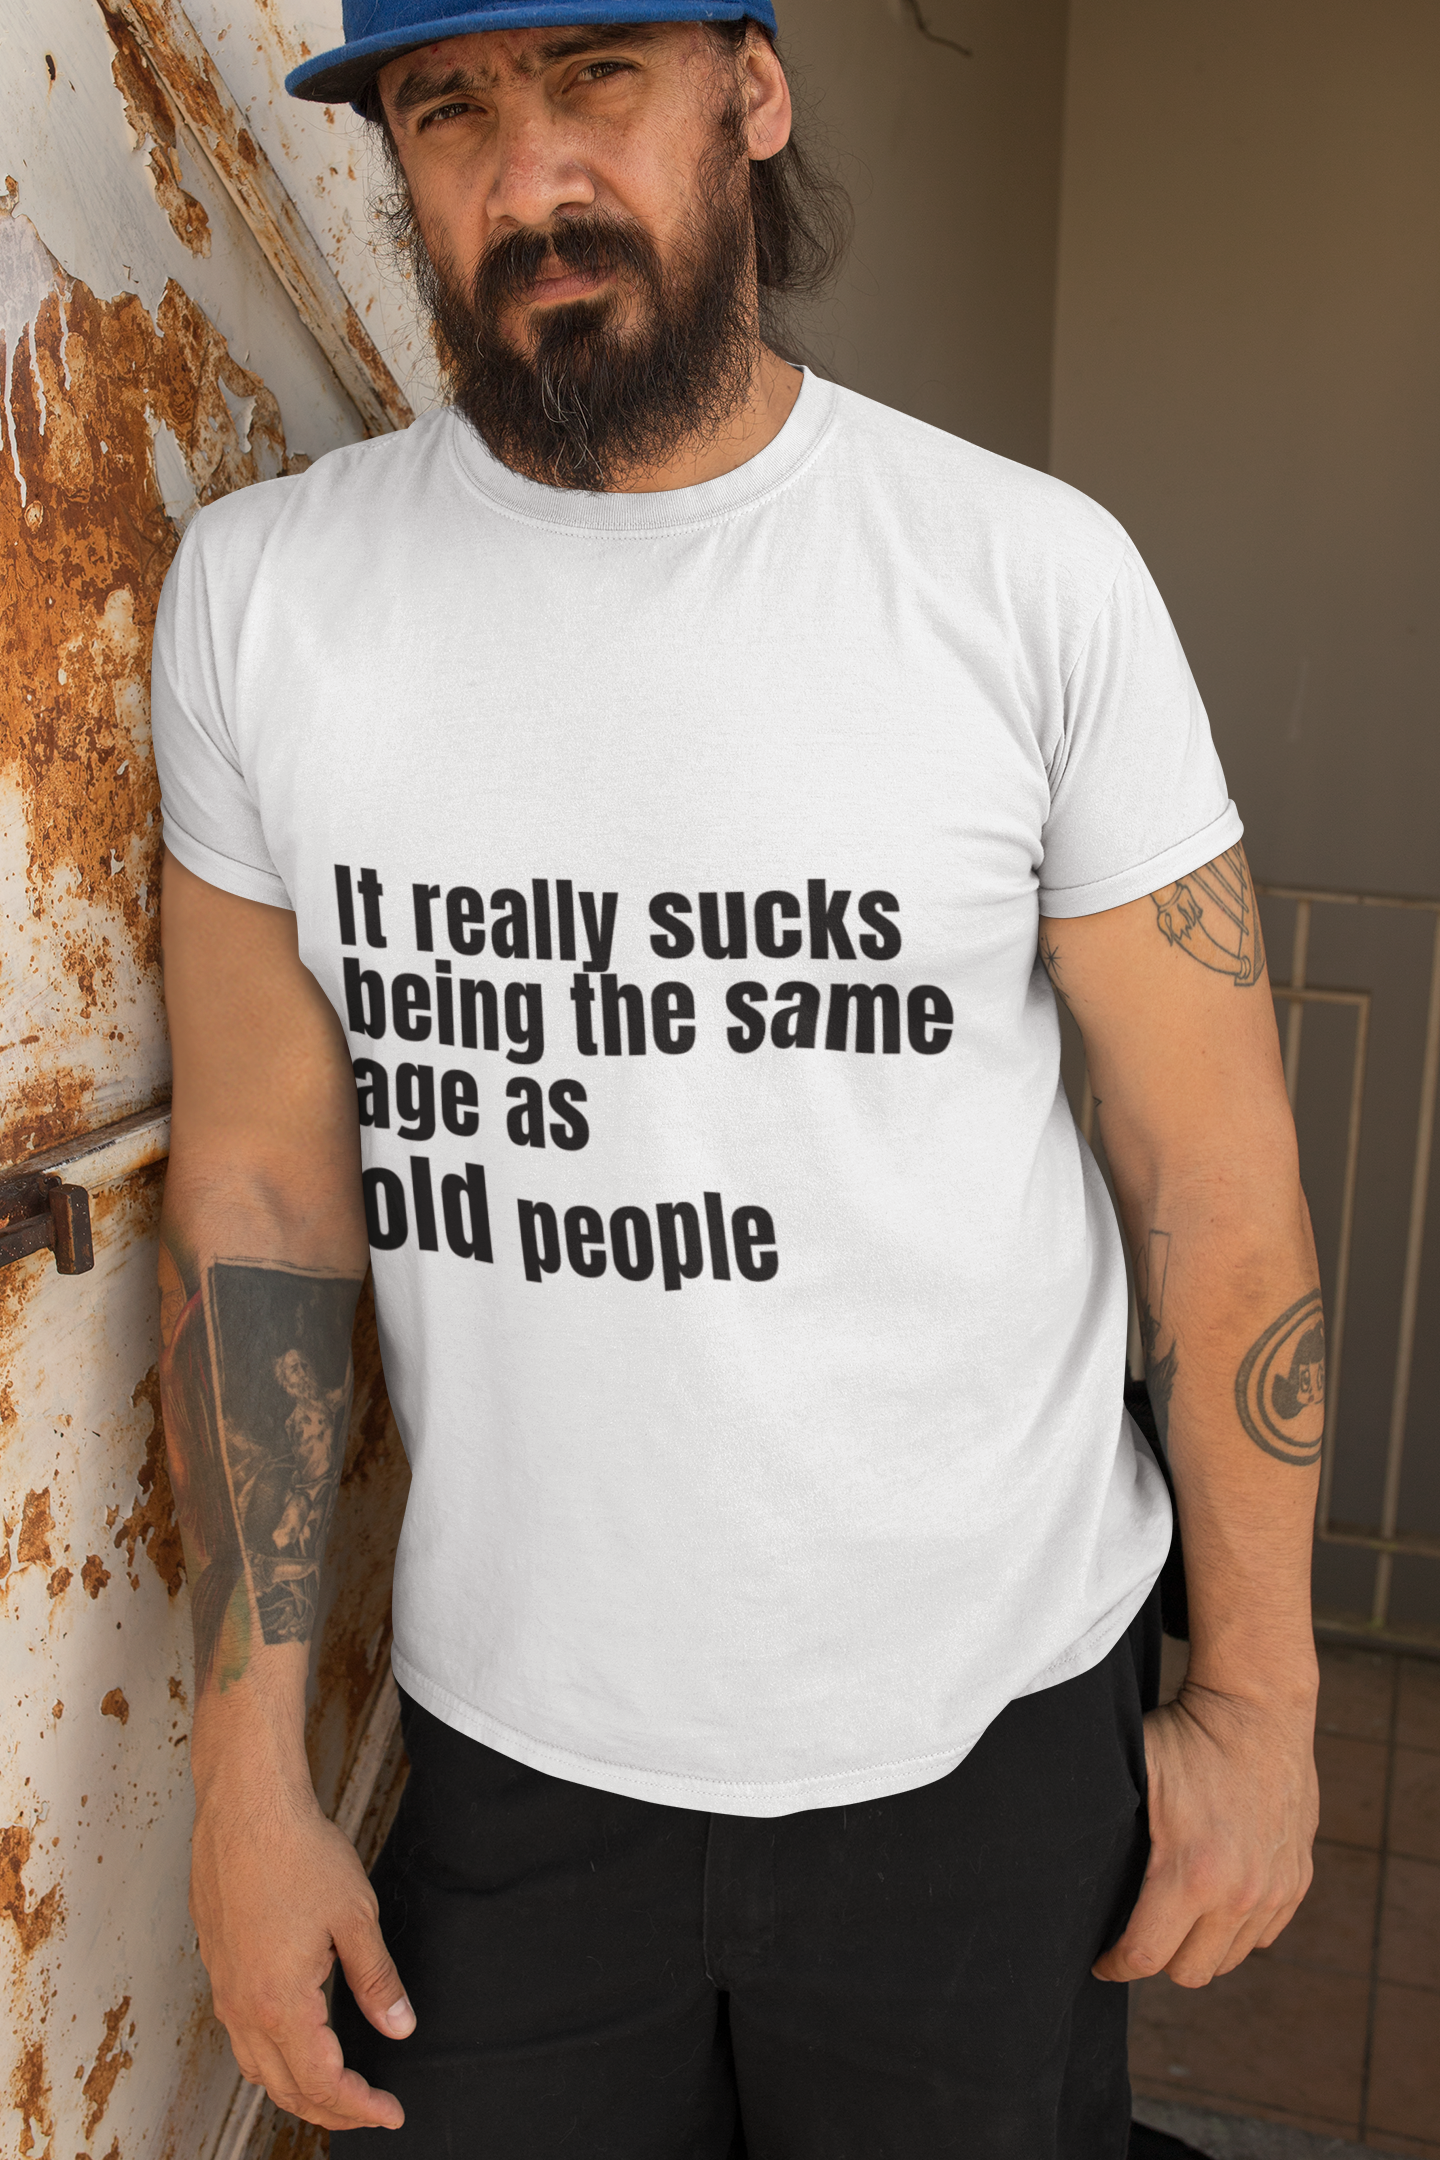 It really sucks being the same age as old people - Unisex T-Shirt birthday gift boyfriend gift Christmas gift co-worker gift coworker gift dads day gift Fathers Day Shirt fiance gift funny shirt gift for boyfriend gift for dad gift for grandpa gift for her gift for him gift for husband gift for mom gift for sister gift for wife gift idea girlfriend gift Husband Gift moms gift mothers day gift Mothers Day shirt school gift T-Shirt teacher gift Unique gift wife gift